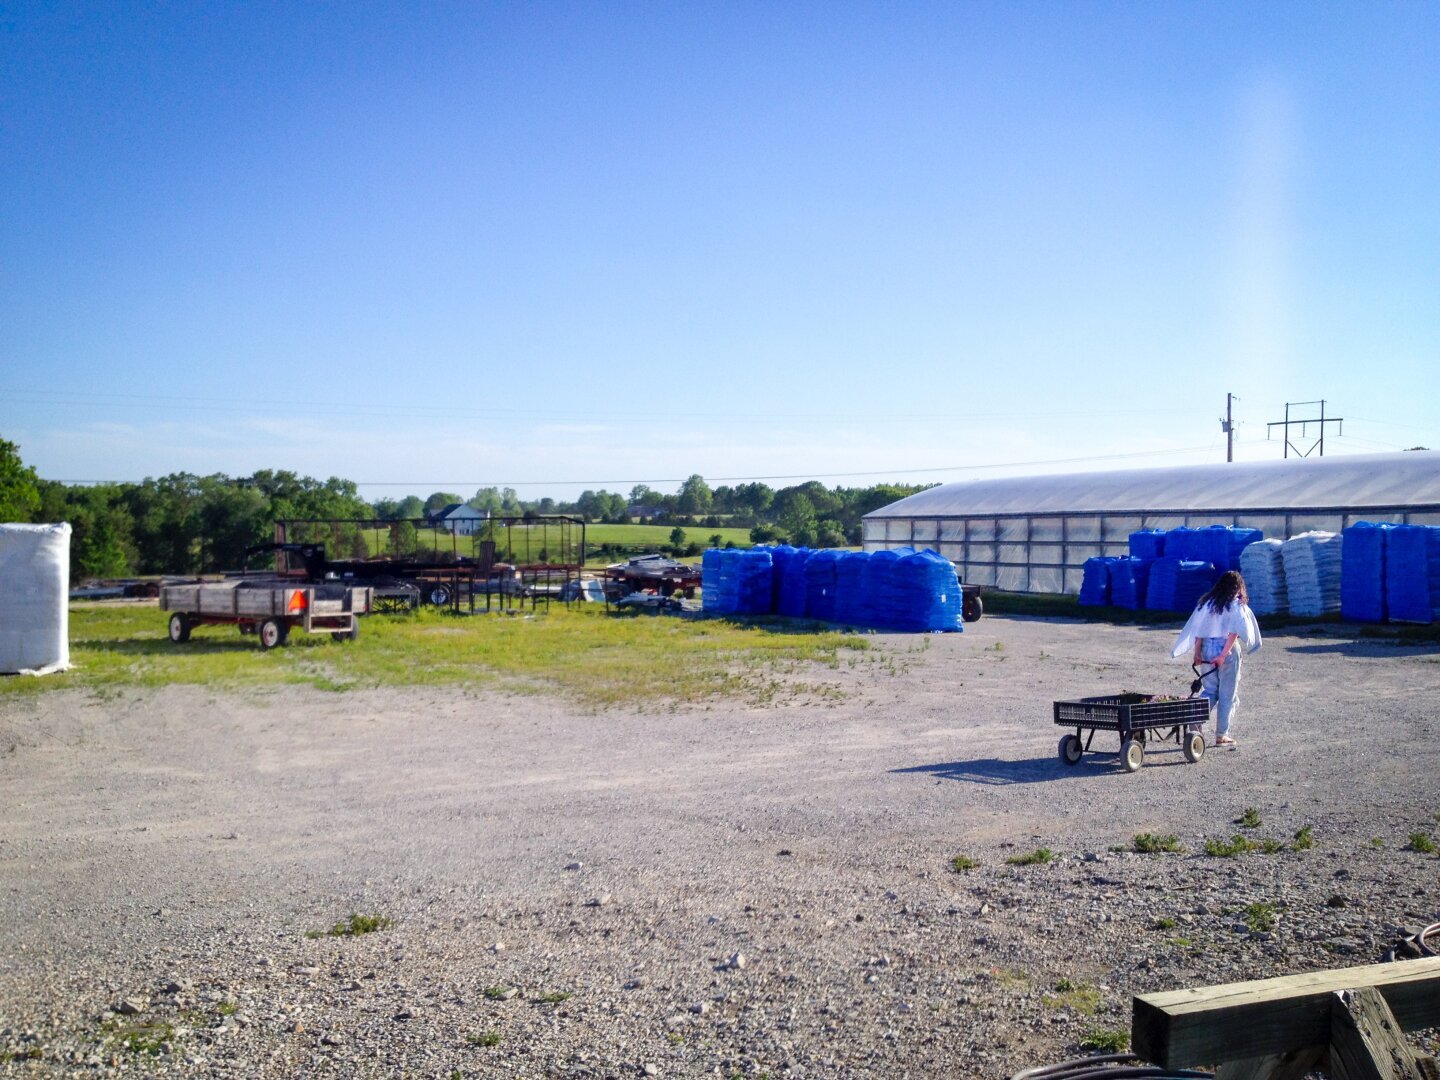 An outdoor scene at an industrial or agricultural site with a person pulling a cart. Large stacks of blue and white bags or containers are piled near a long building surrounded by open fields and trees under a clear blue sky.